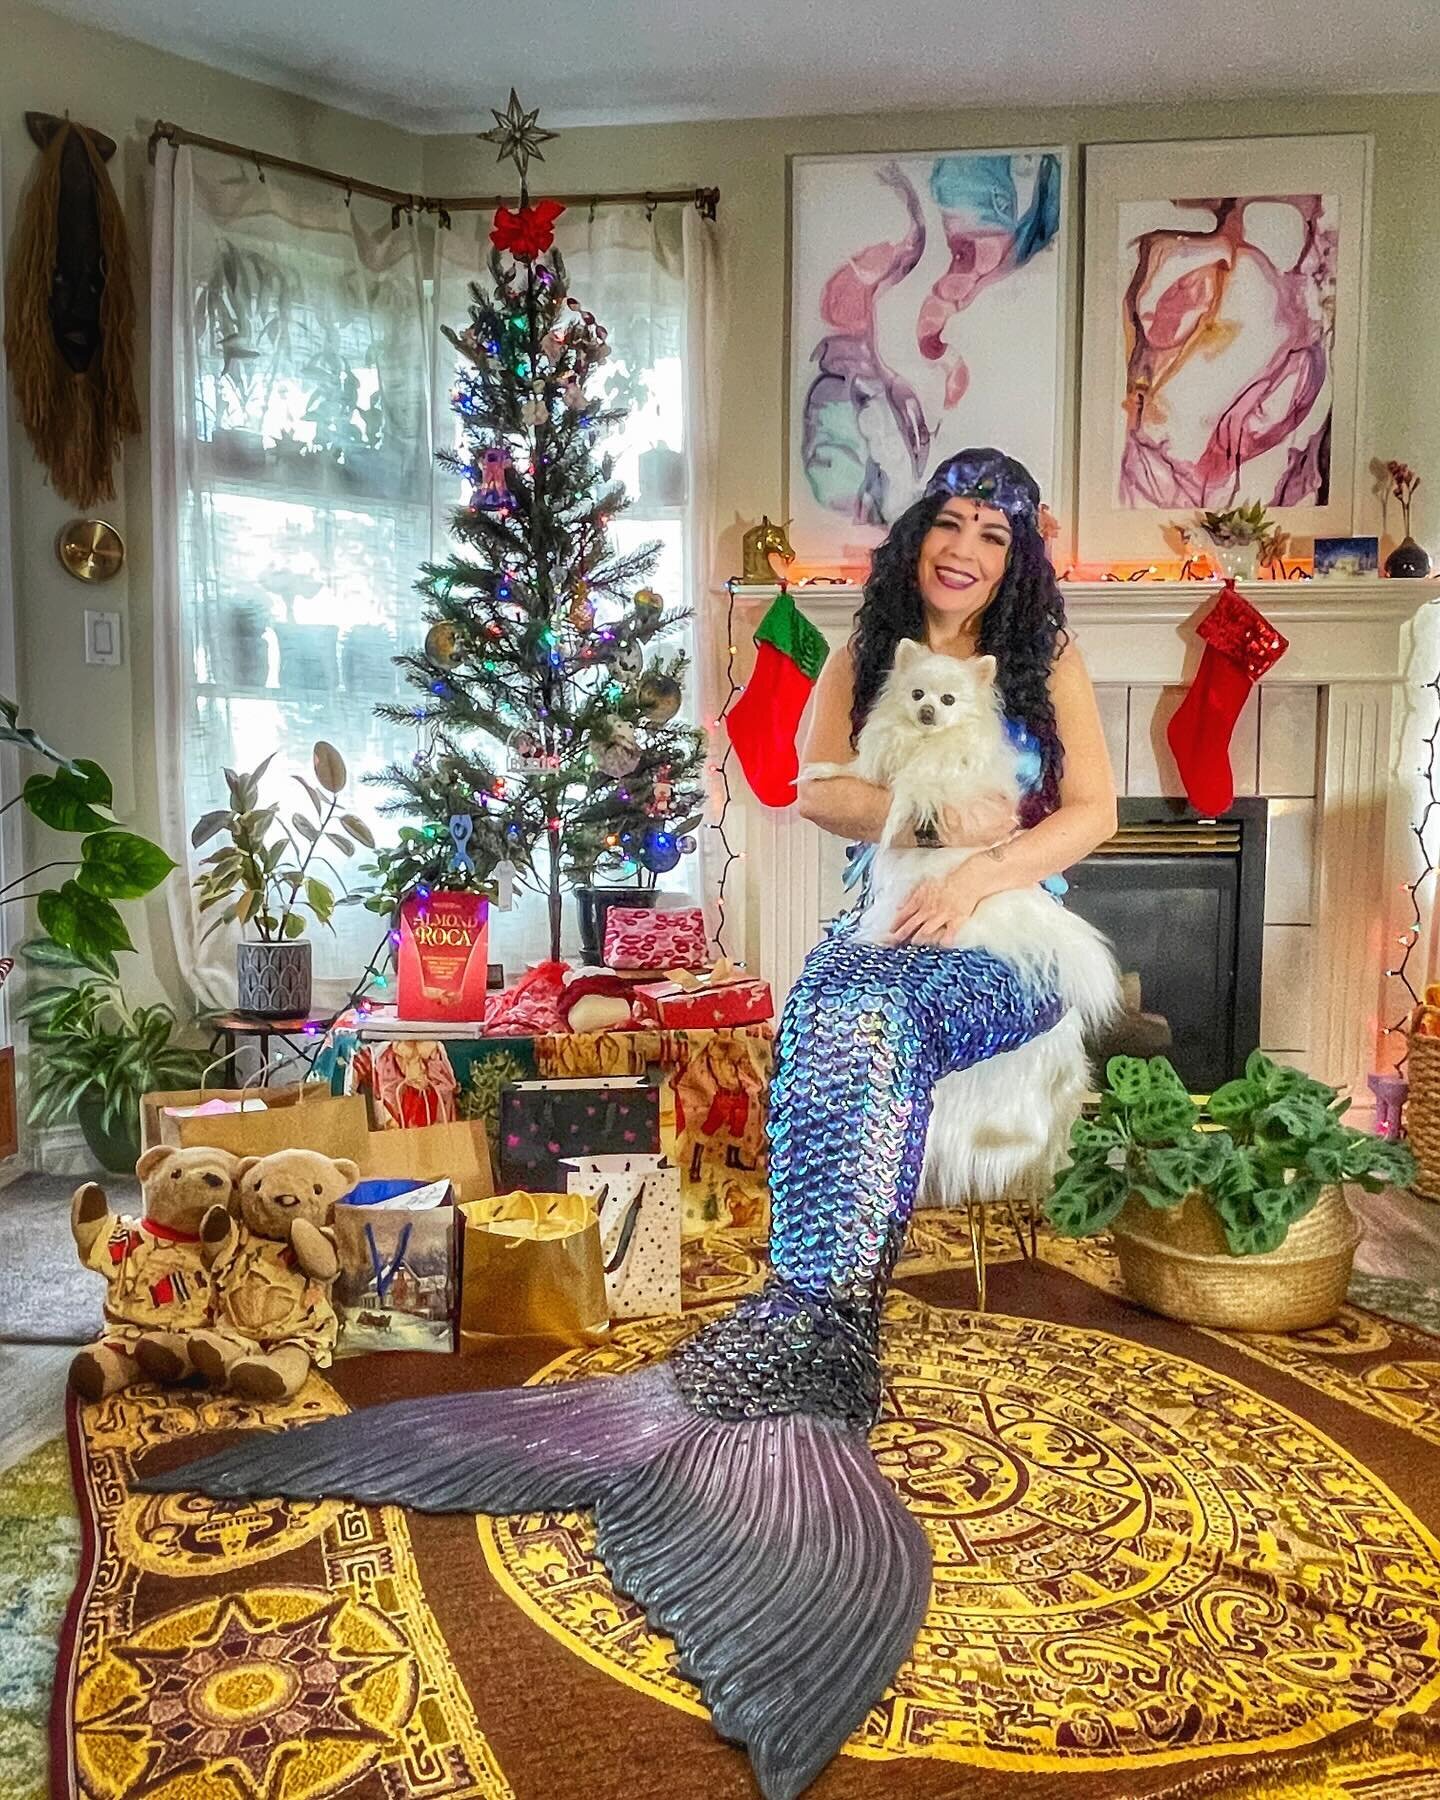 Merry Fishmas from your friendly neighbourhood cryptid&mdash;and their little dog, too! Wherever this finds you, I&rsquo;m grateful you&rsquo;re in my life. 

Photo and scene @nate.nainers
Styling and editing @drdeirdremorgan
Tail @finfolkproductions